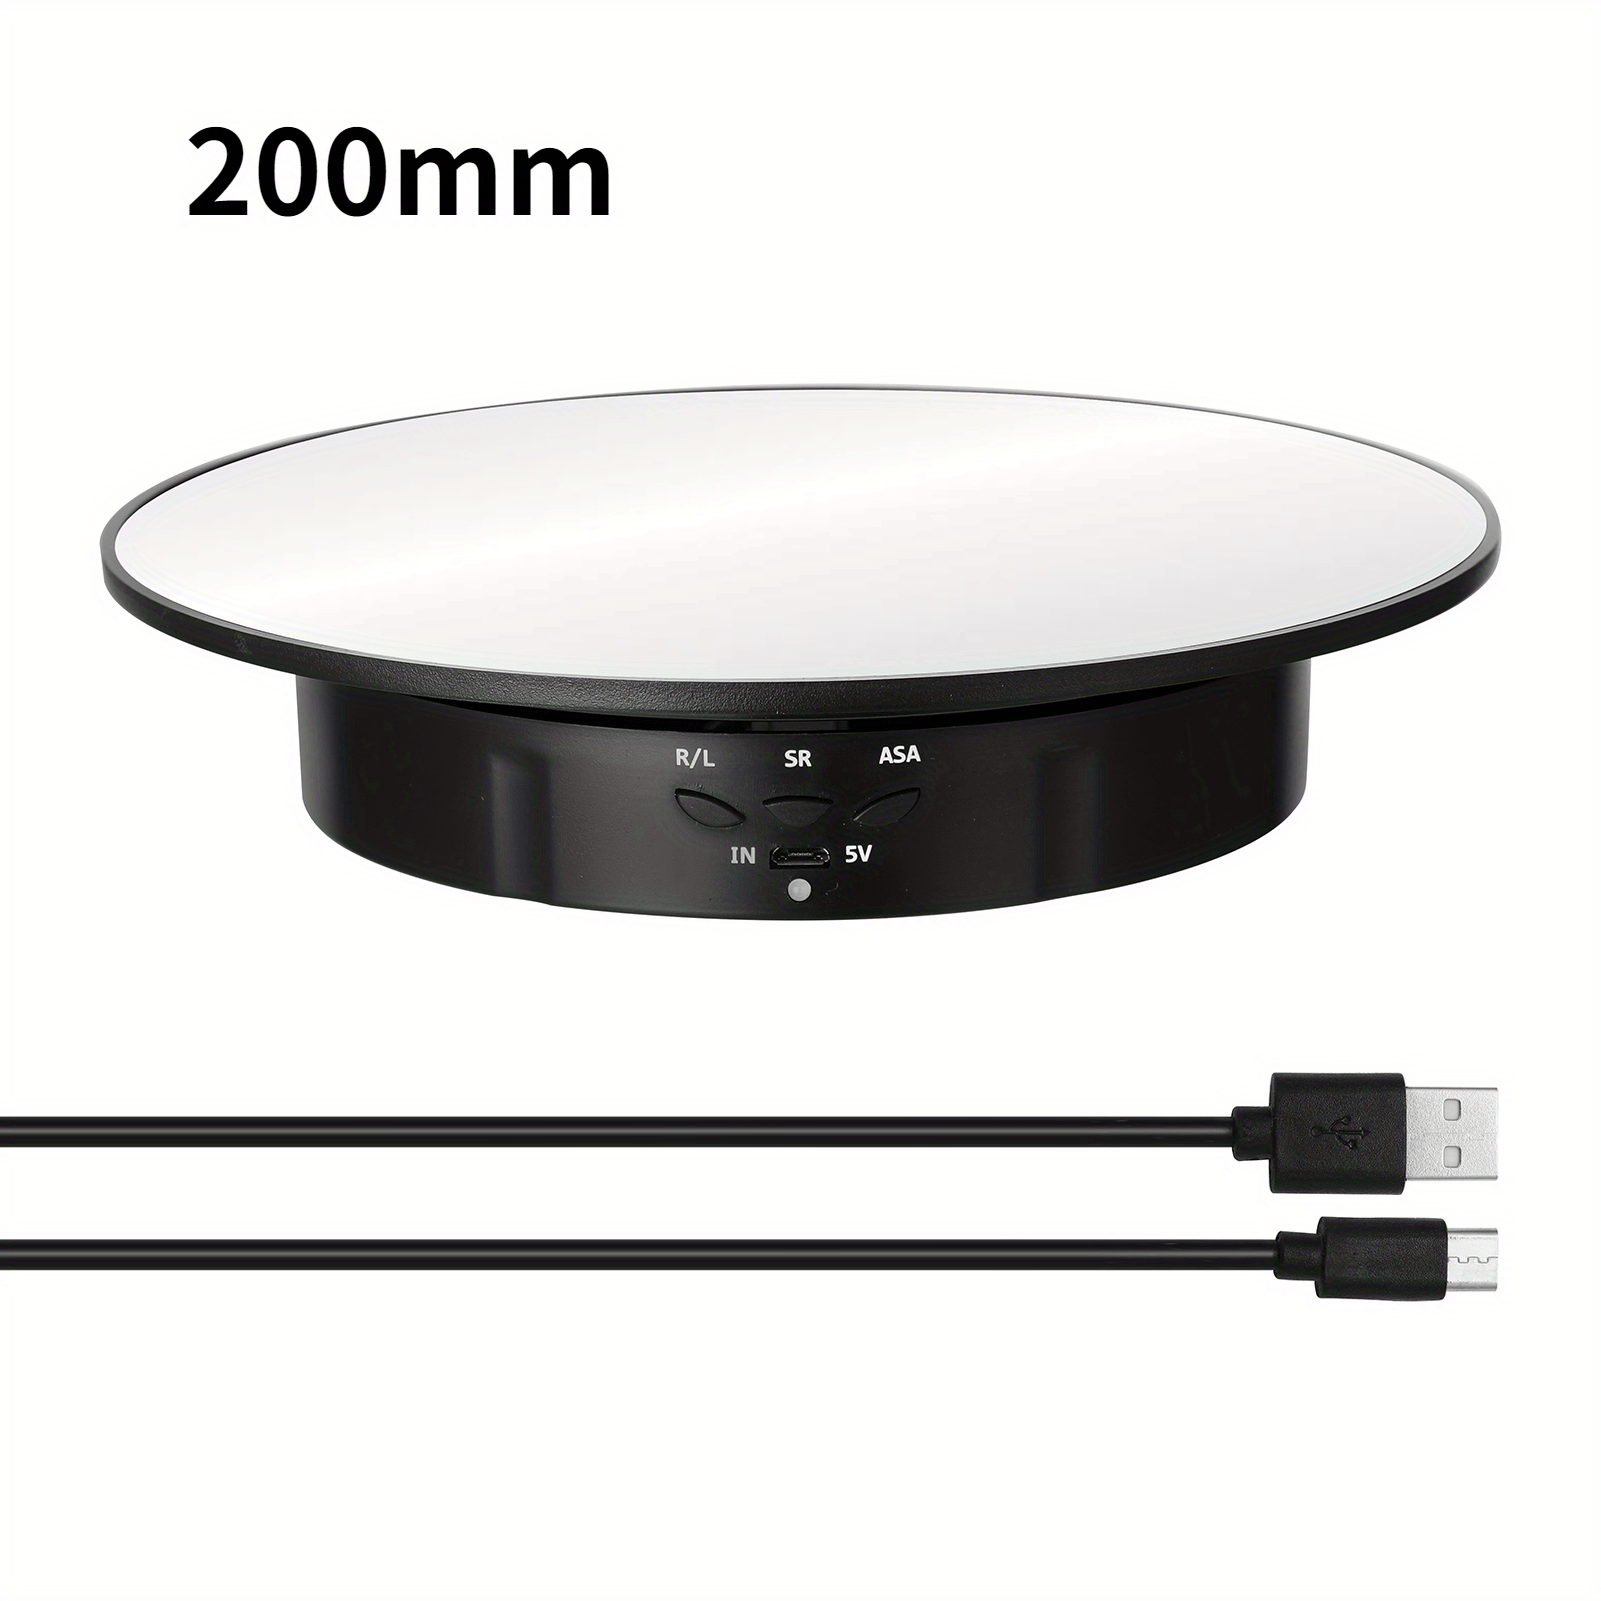 Qinmay 360 Degree Electric Rotating Turntable,Battery/USB Power Supply for  Photography Product Shows (Black 5.74 inches /22LB Load)